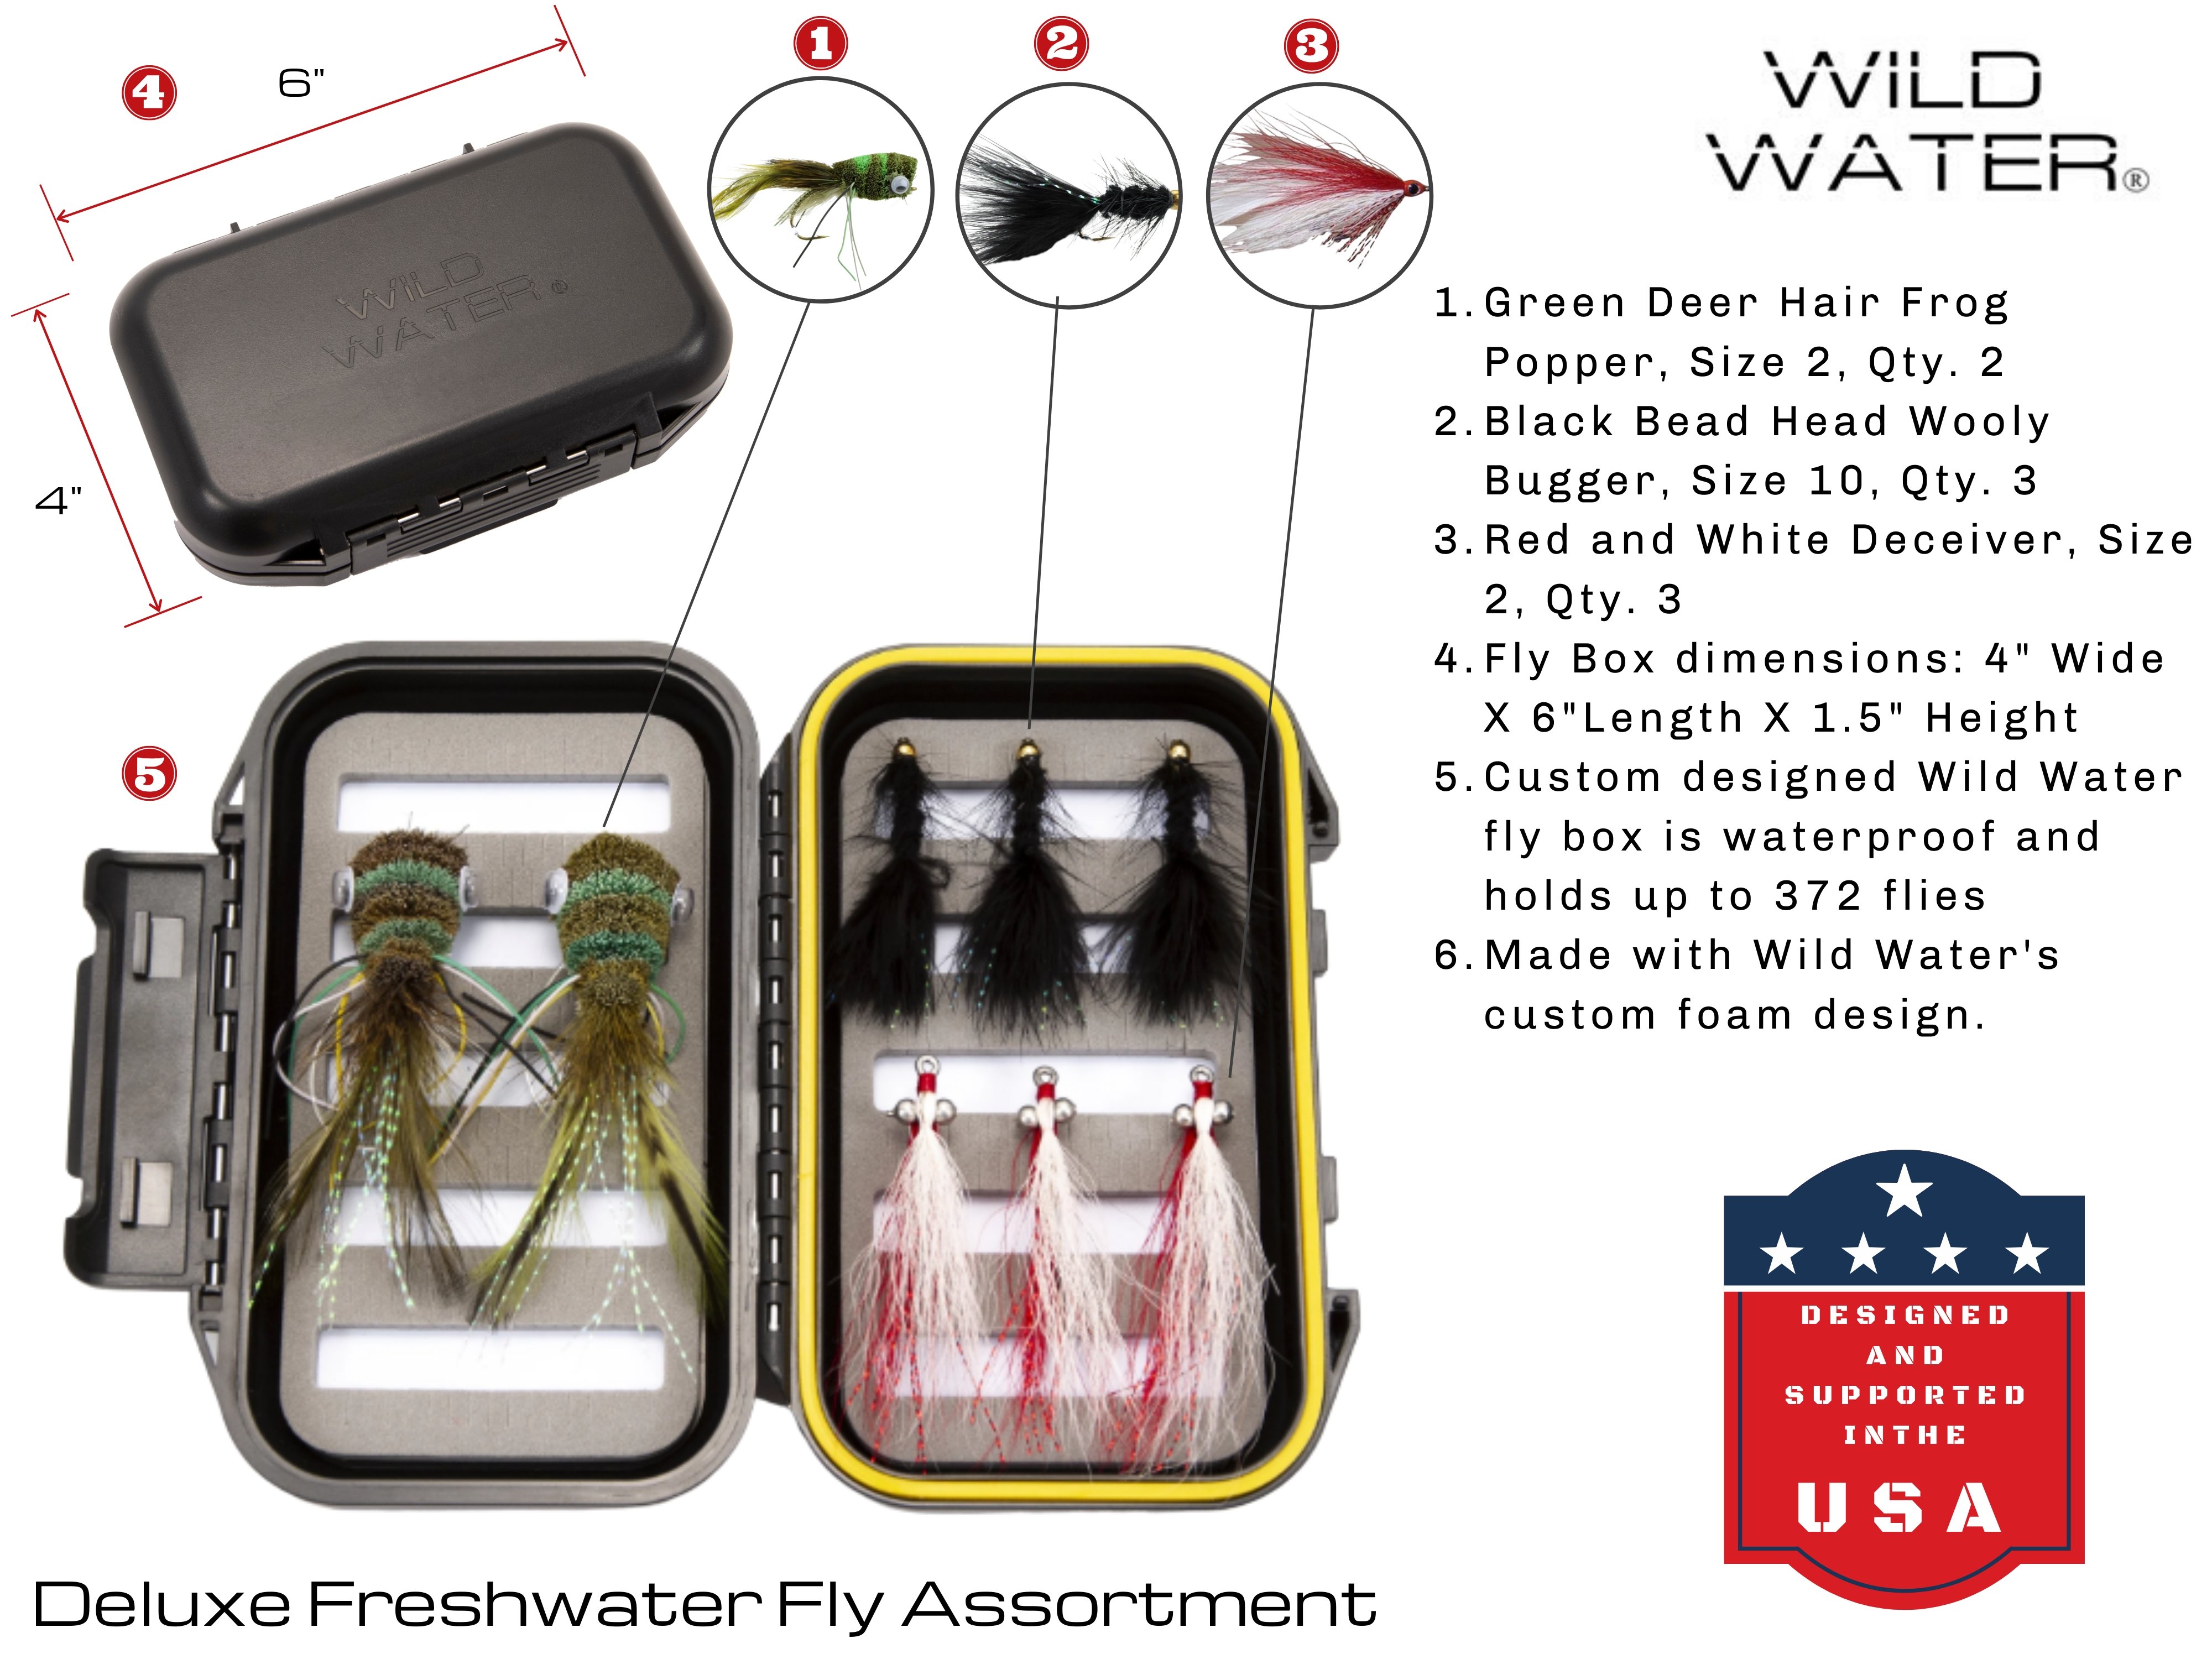 Wild Water Fly Fishing, 9 Foot, 8 Weight, 7 Piece Pack Rod and Reel, Deluxe Combo Kit, Freshwater Flies - image 5 of 6